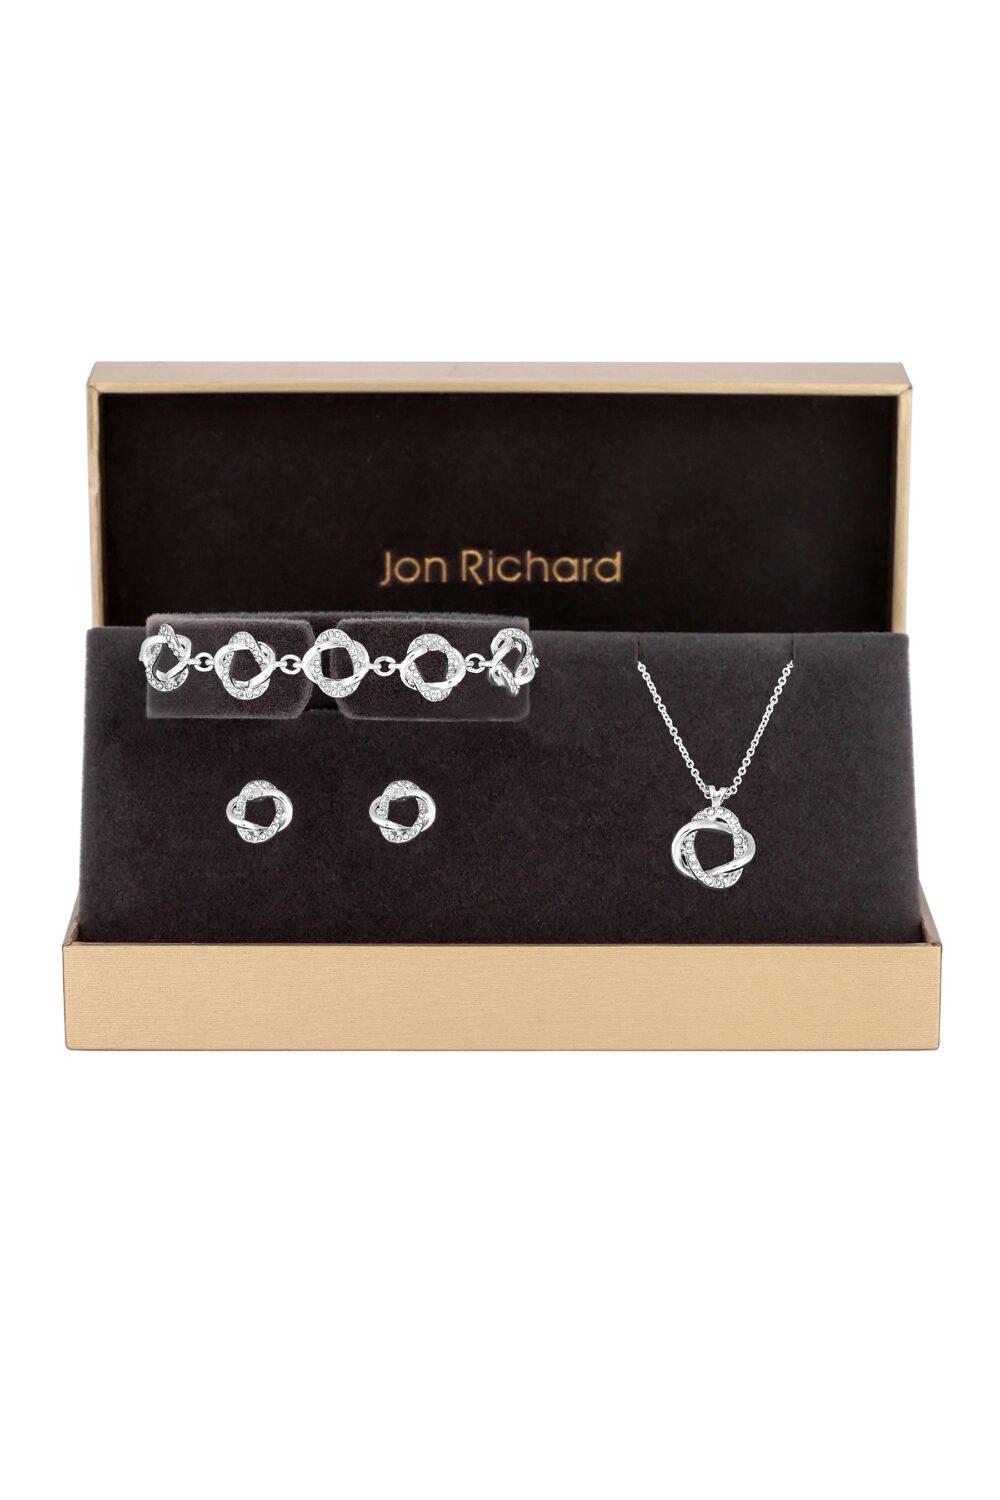 Jon Richard Women's Silver Plated Twist Polished And Pave Trio Set - Gift Boxed|silver